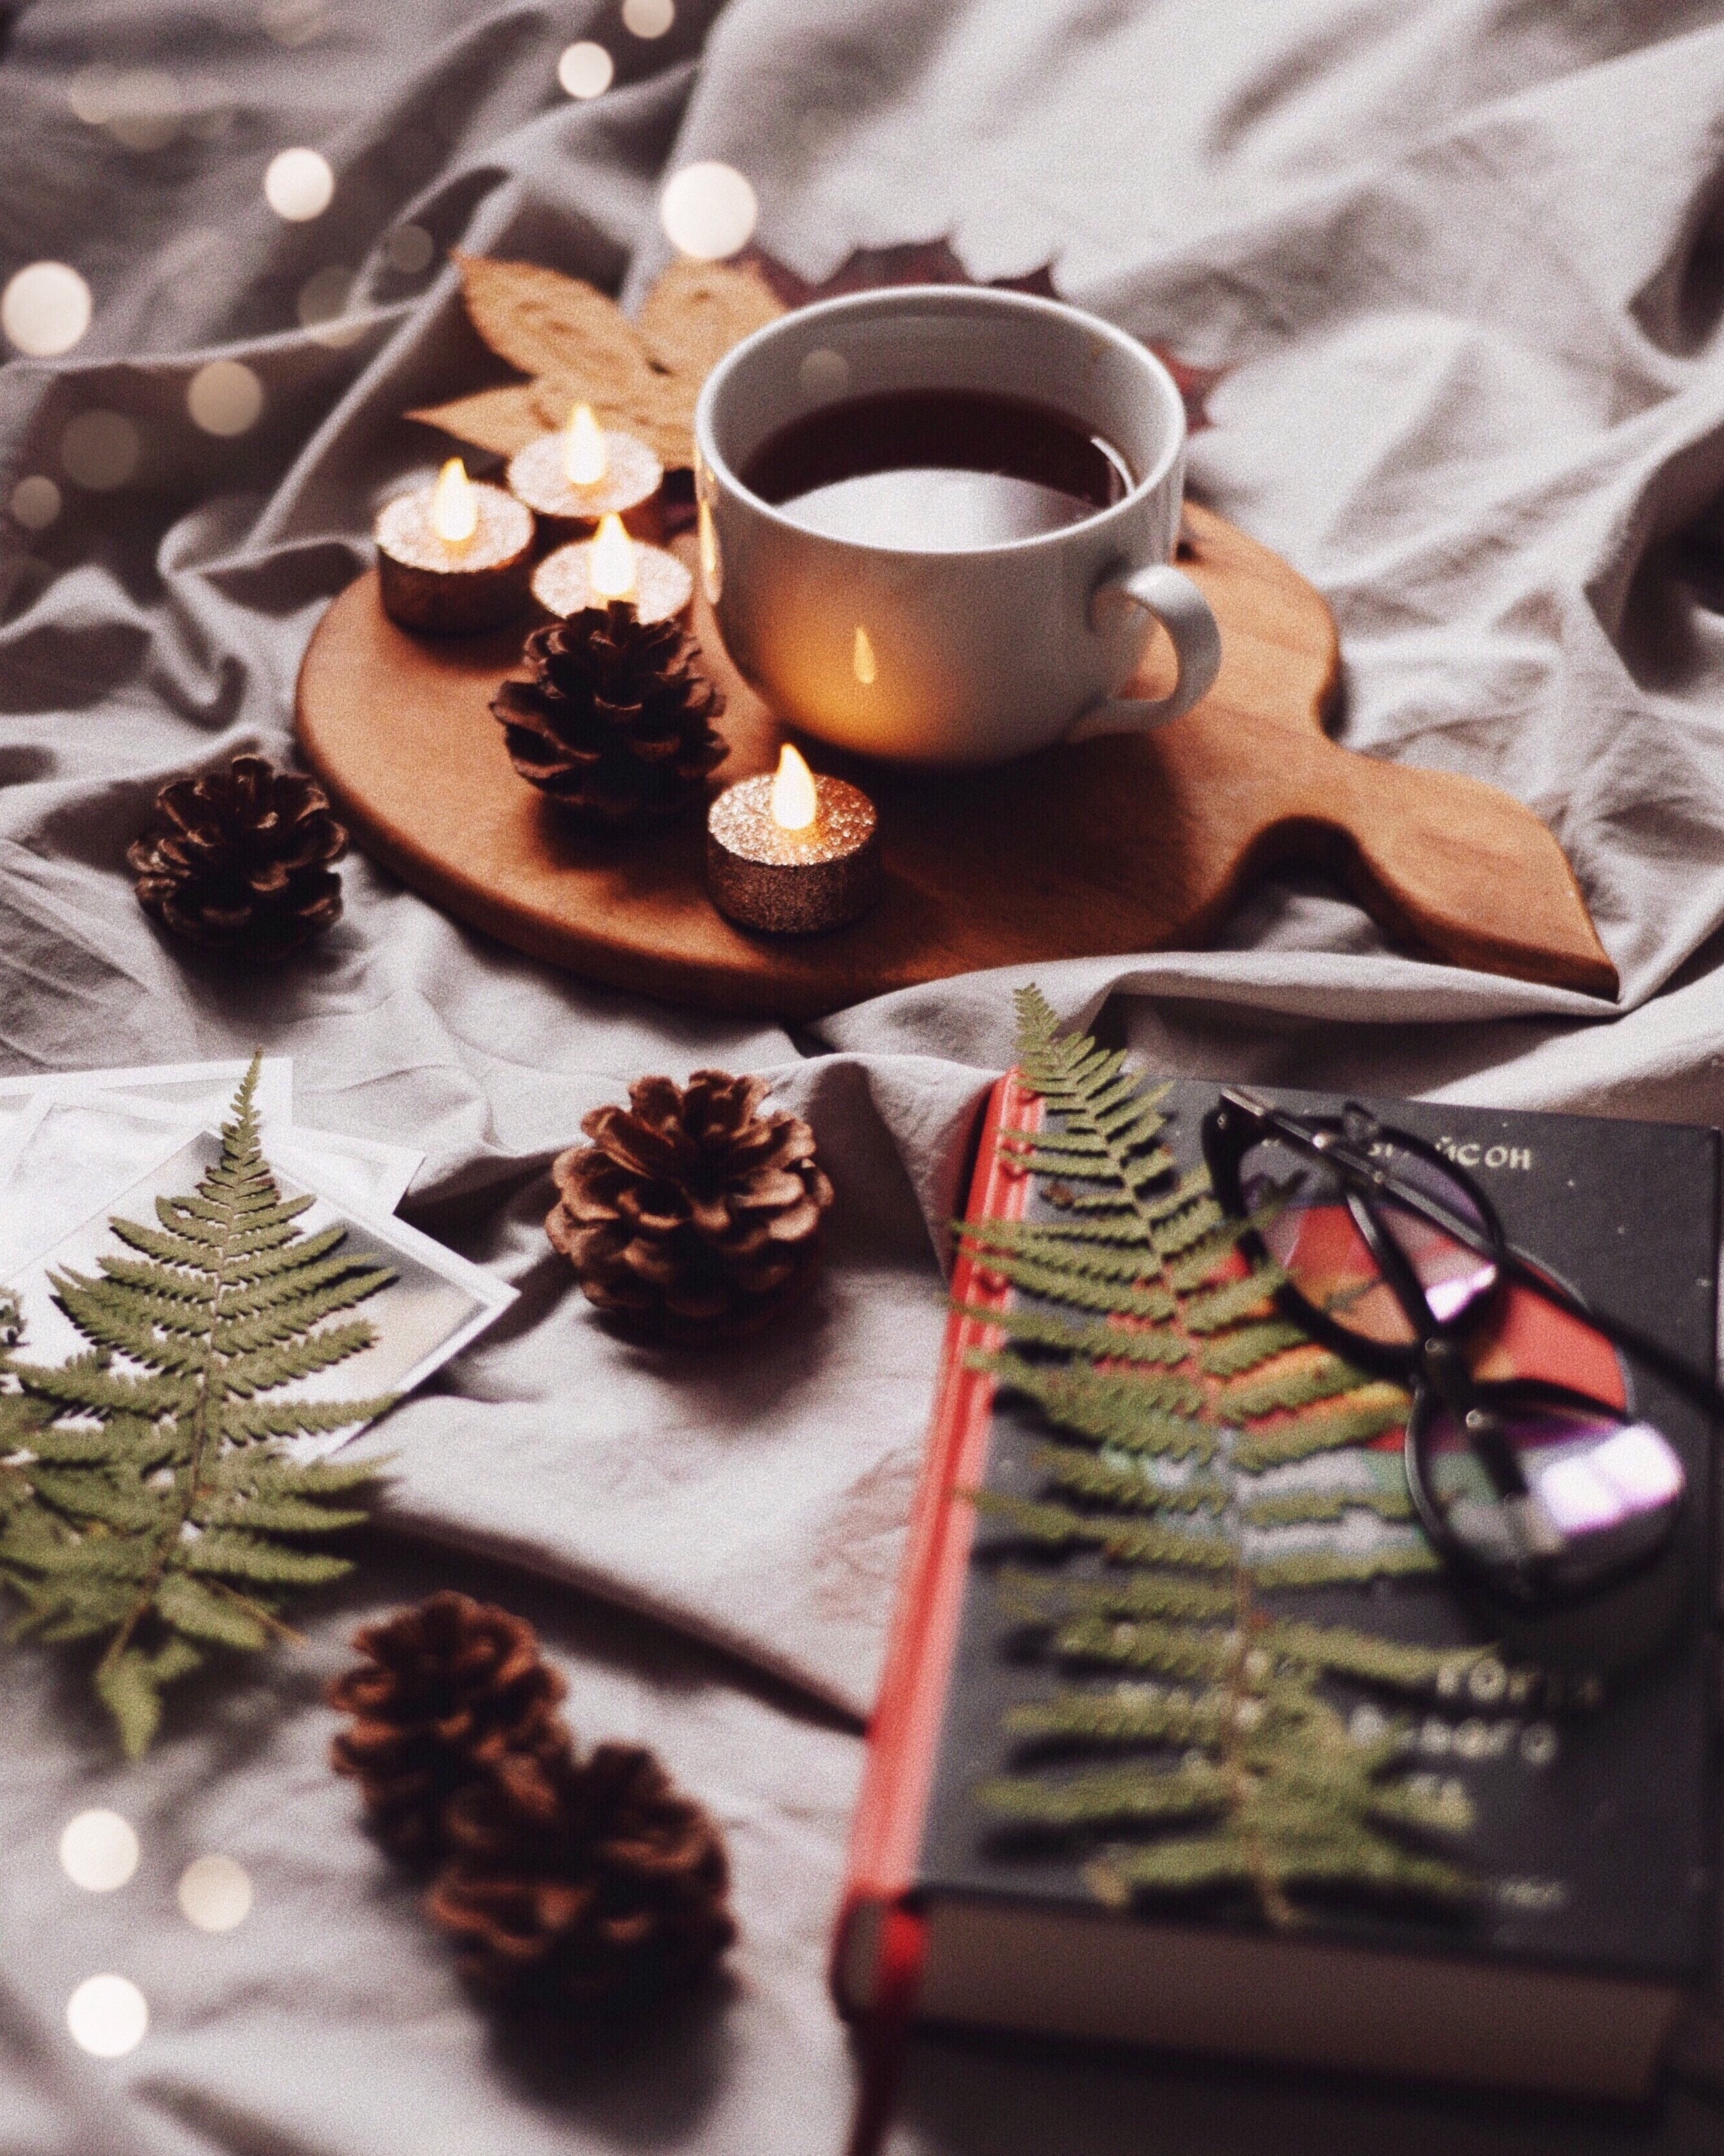 Mobile wallpaper: Drink, Cup, Cones, Coziness, Comfort, Miscellaneous,  Miscellanea, Beverage, Book, Coffee, Candles, 91248 download the picture  for free.